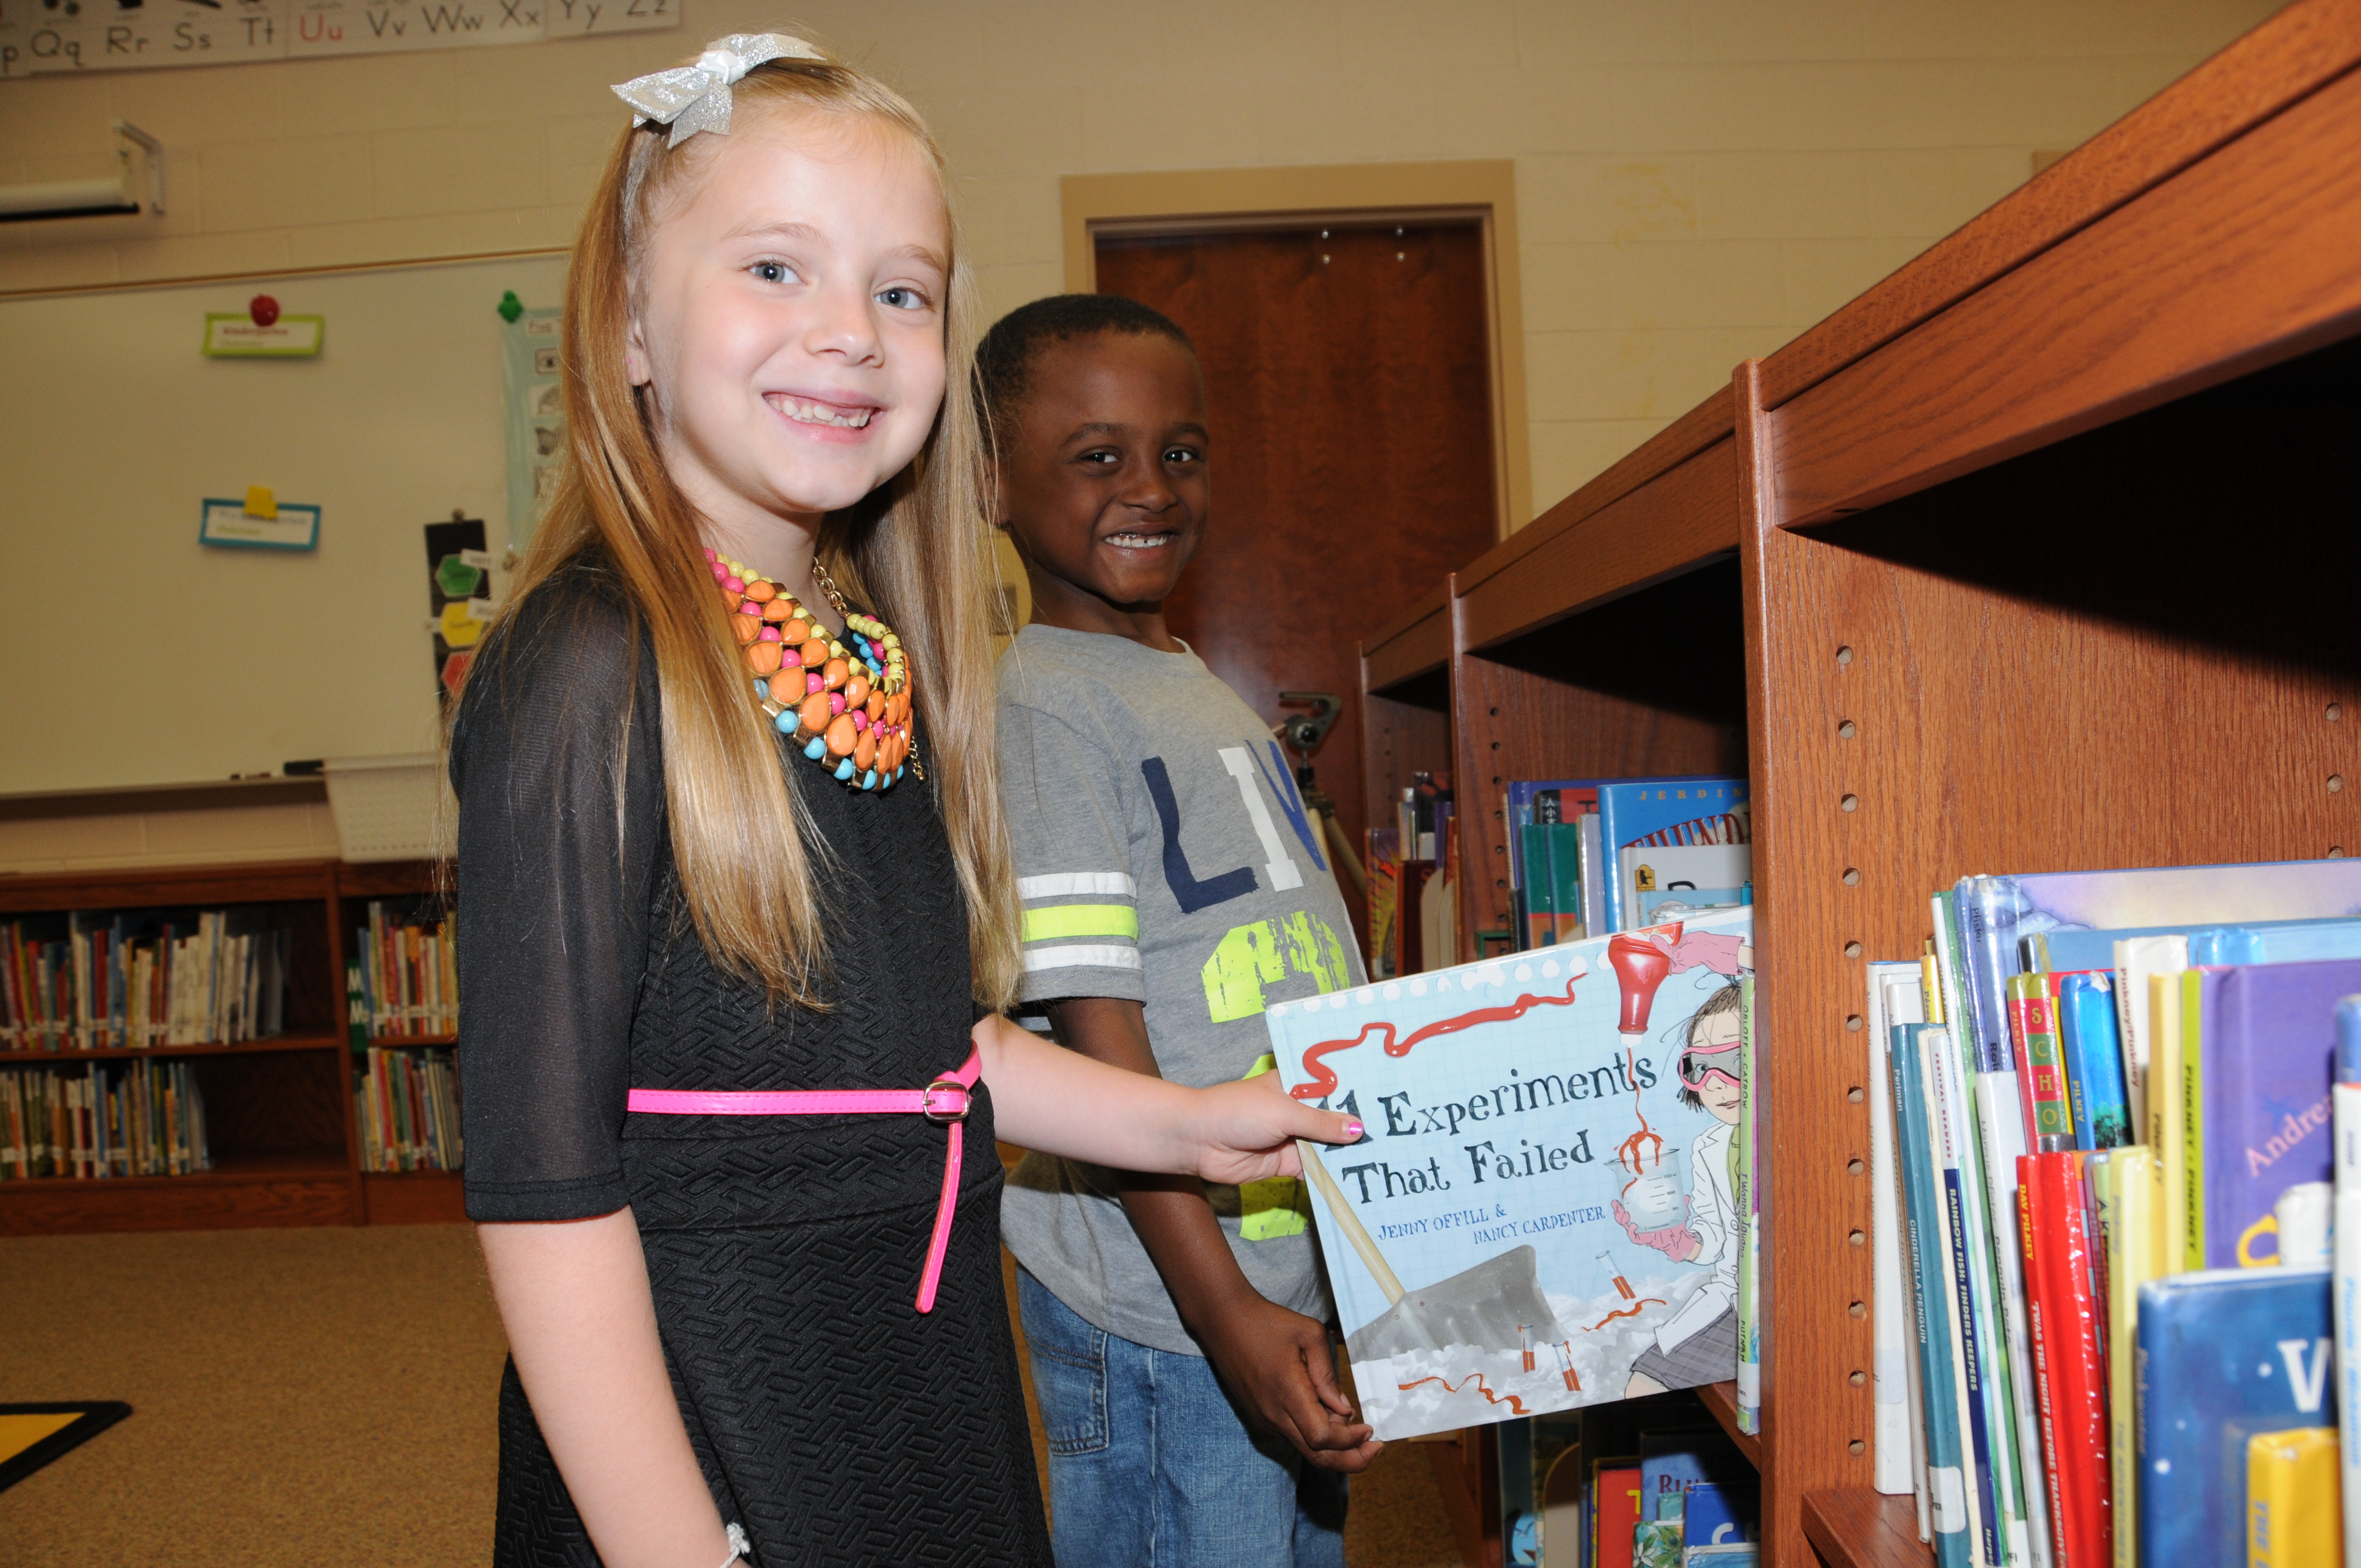 Two elementary school students choosing a book from the media center.